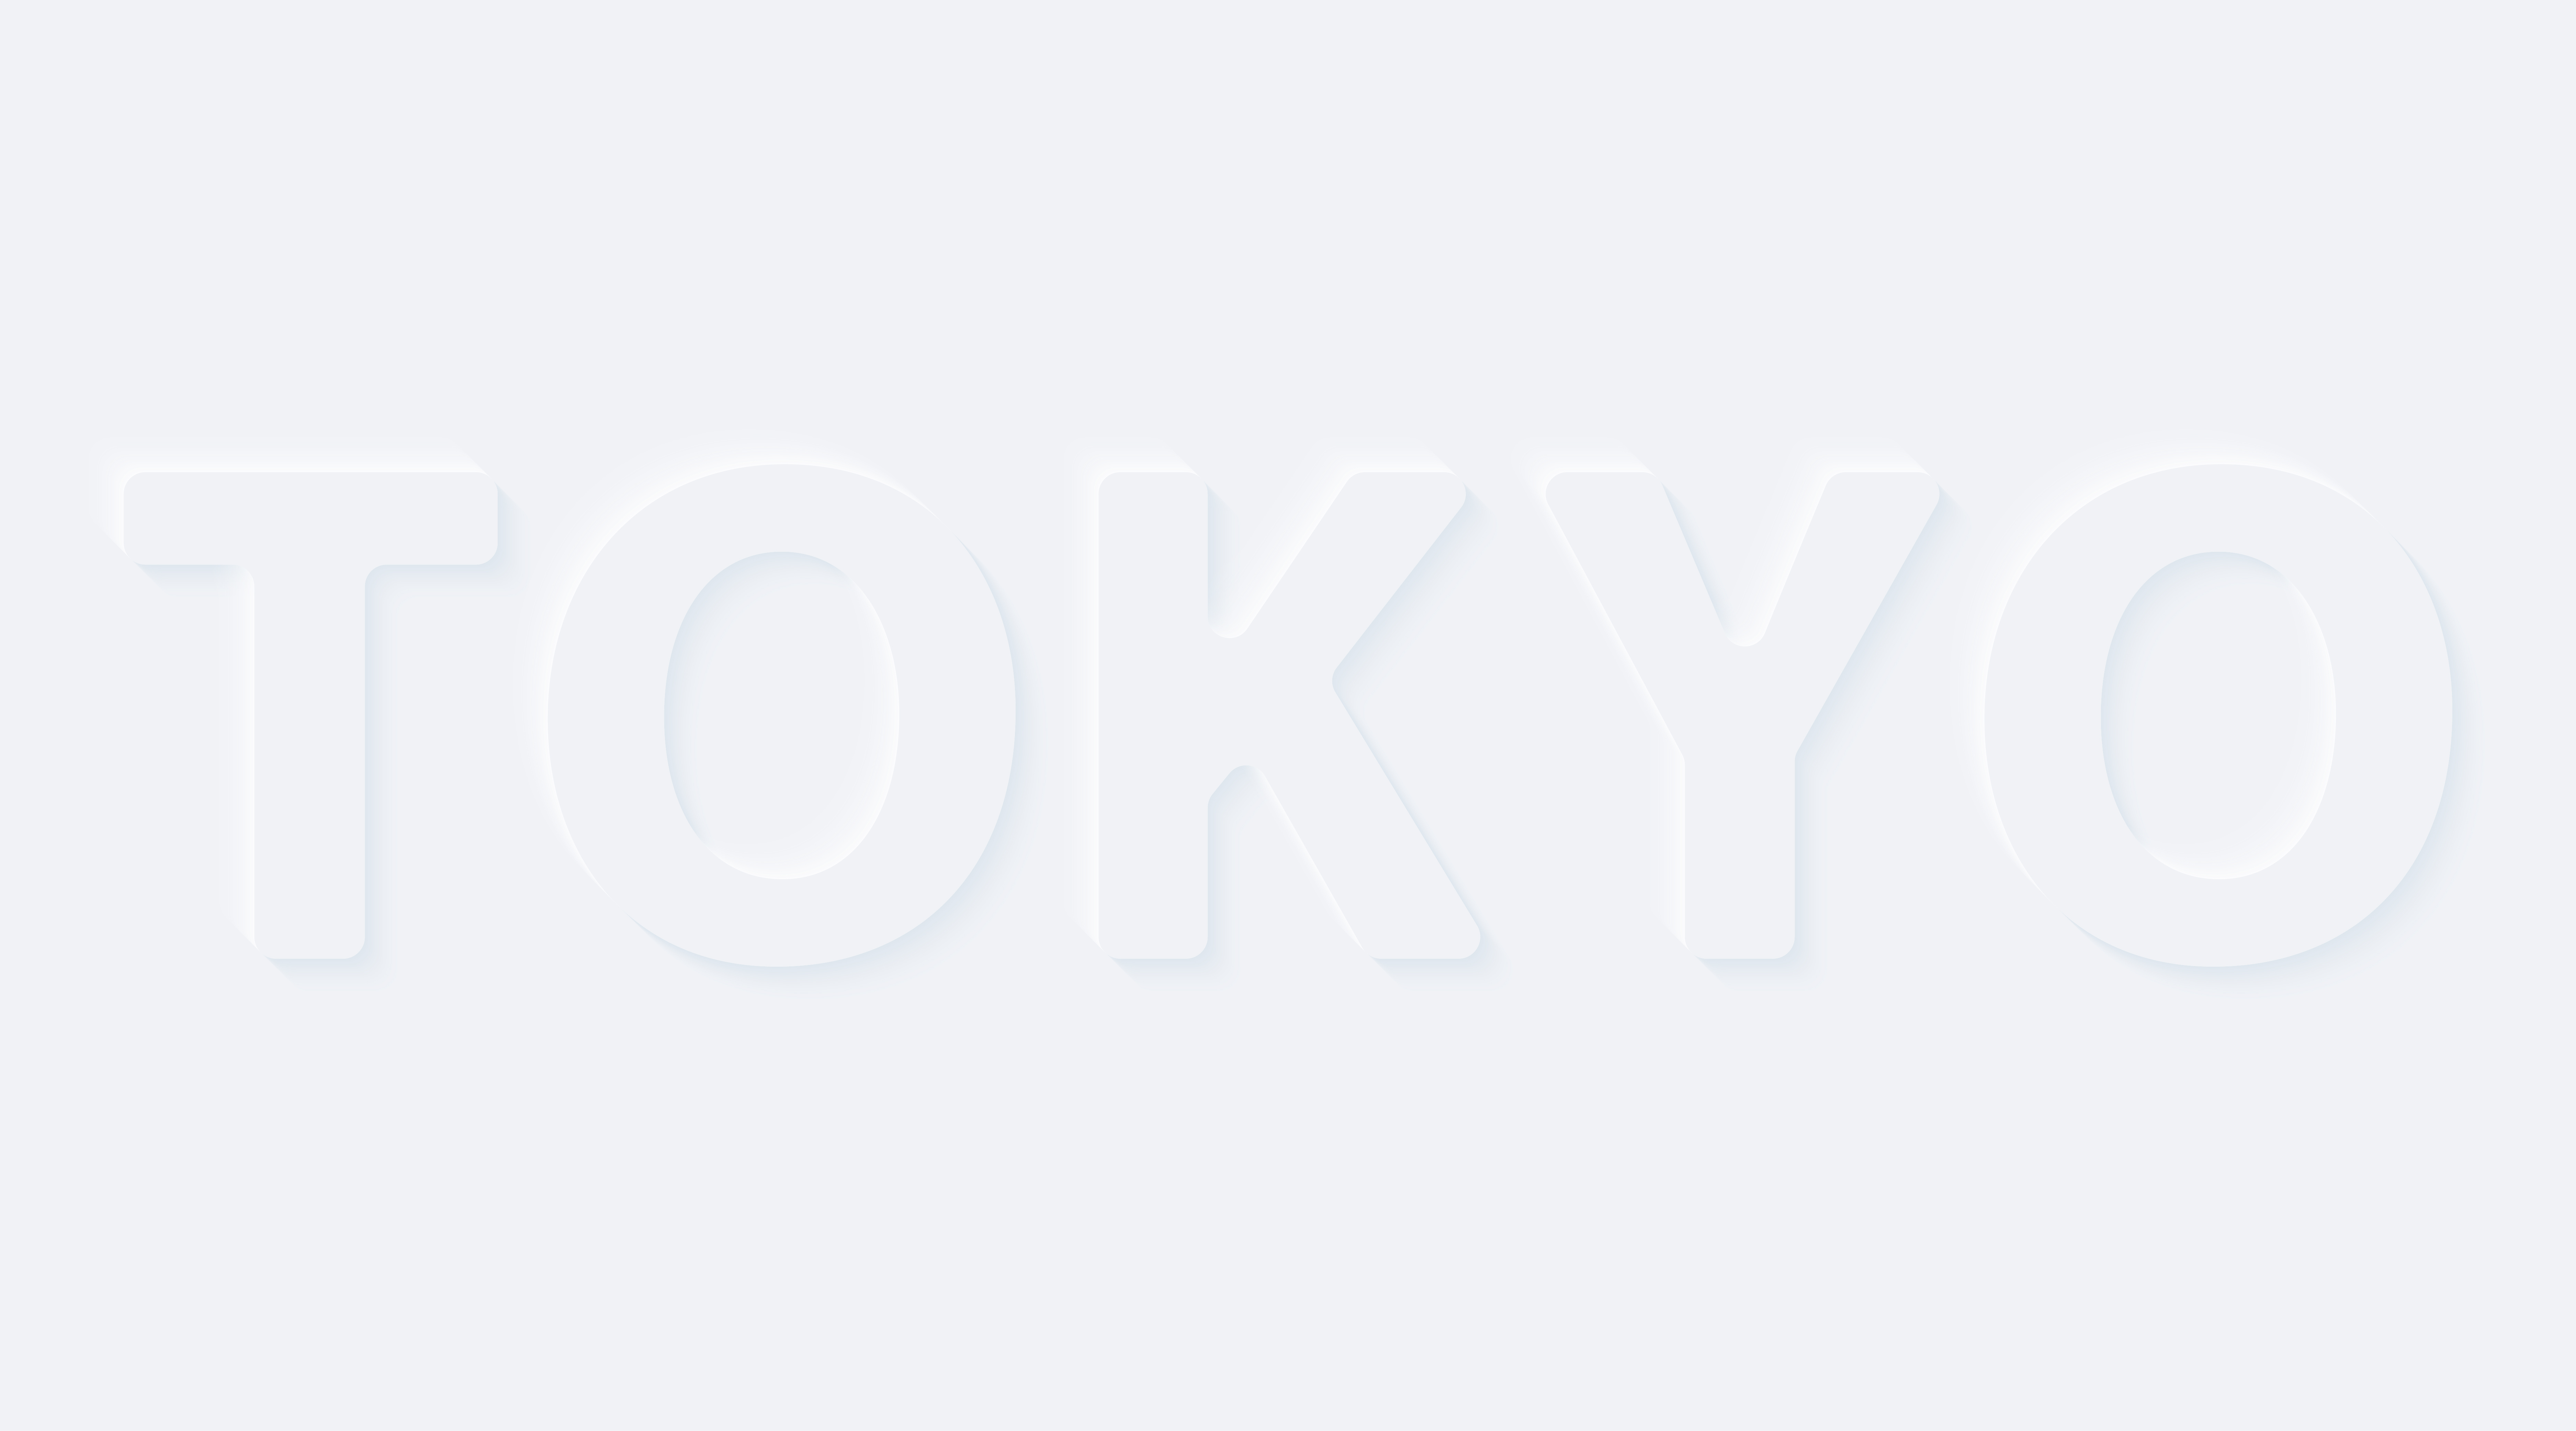 Tokyo. Vector words. Bright white gradient neumorphic effect character type icon. Internet gray symbol isolated on a background.